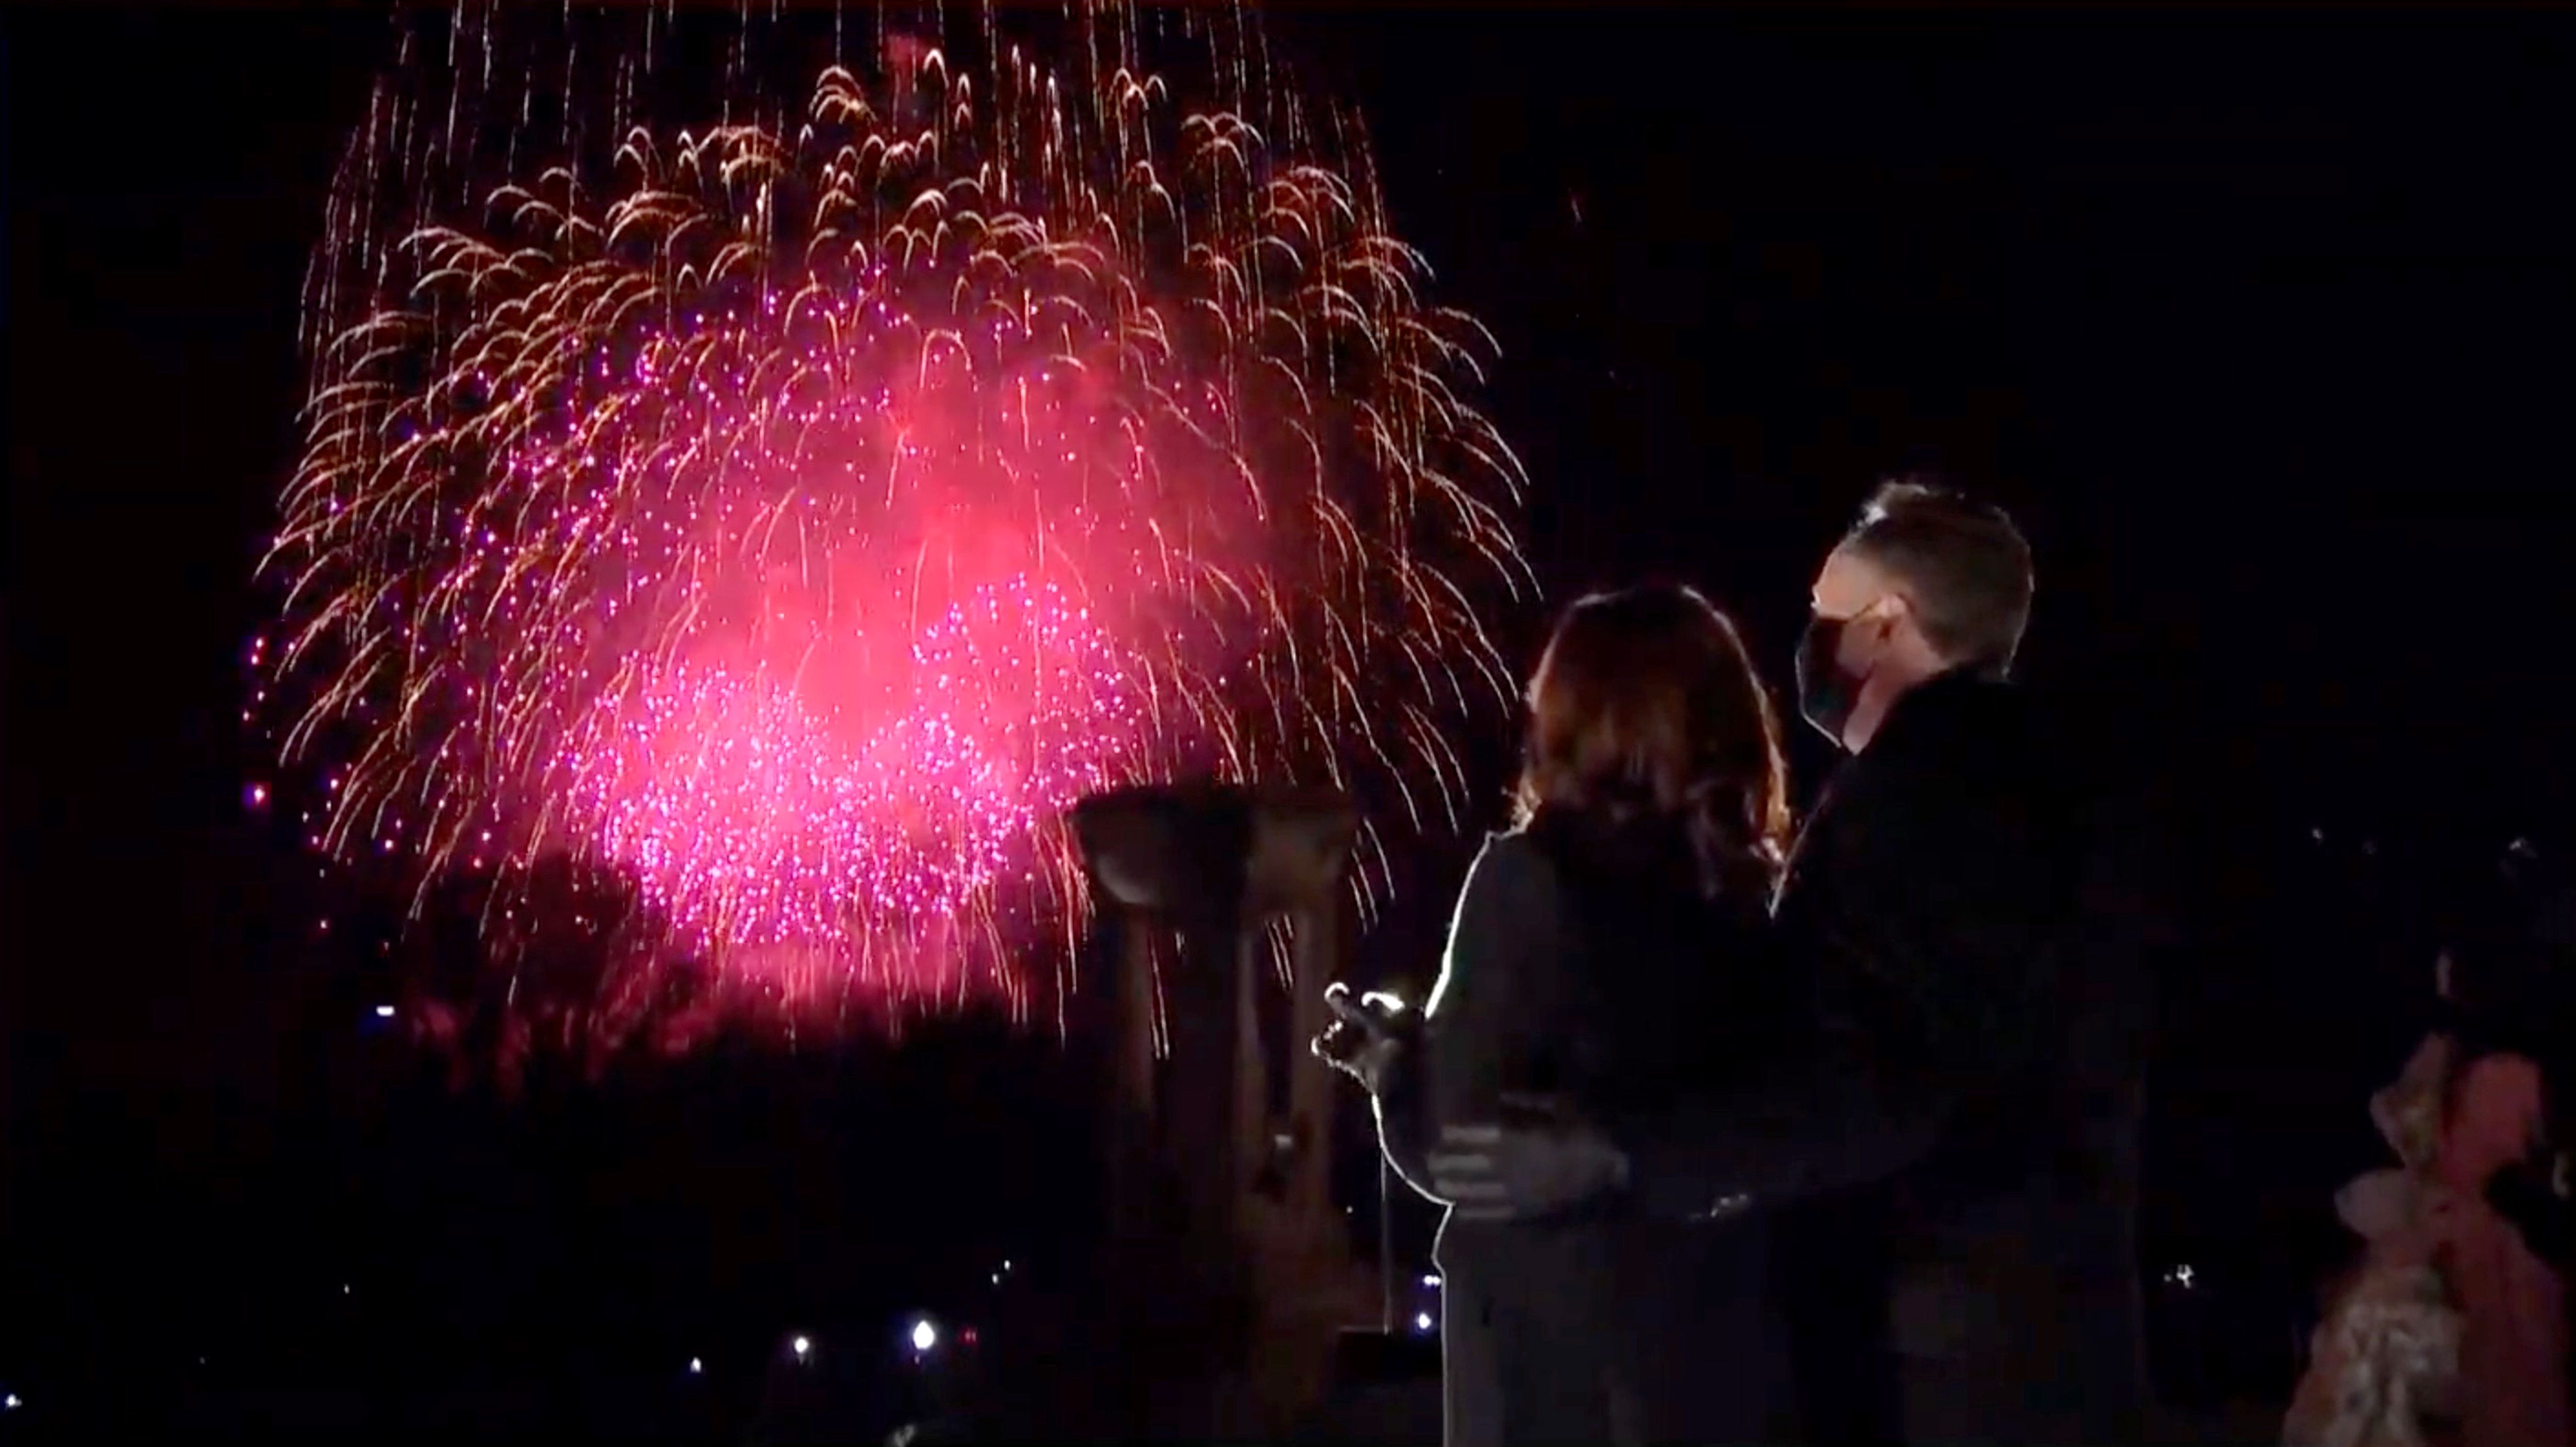  In this screengrab, Vice President Kamala Harris and Doug Emhoff watch fireworks during the Celebrating America Primetime Special on January 20